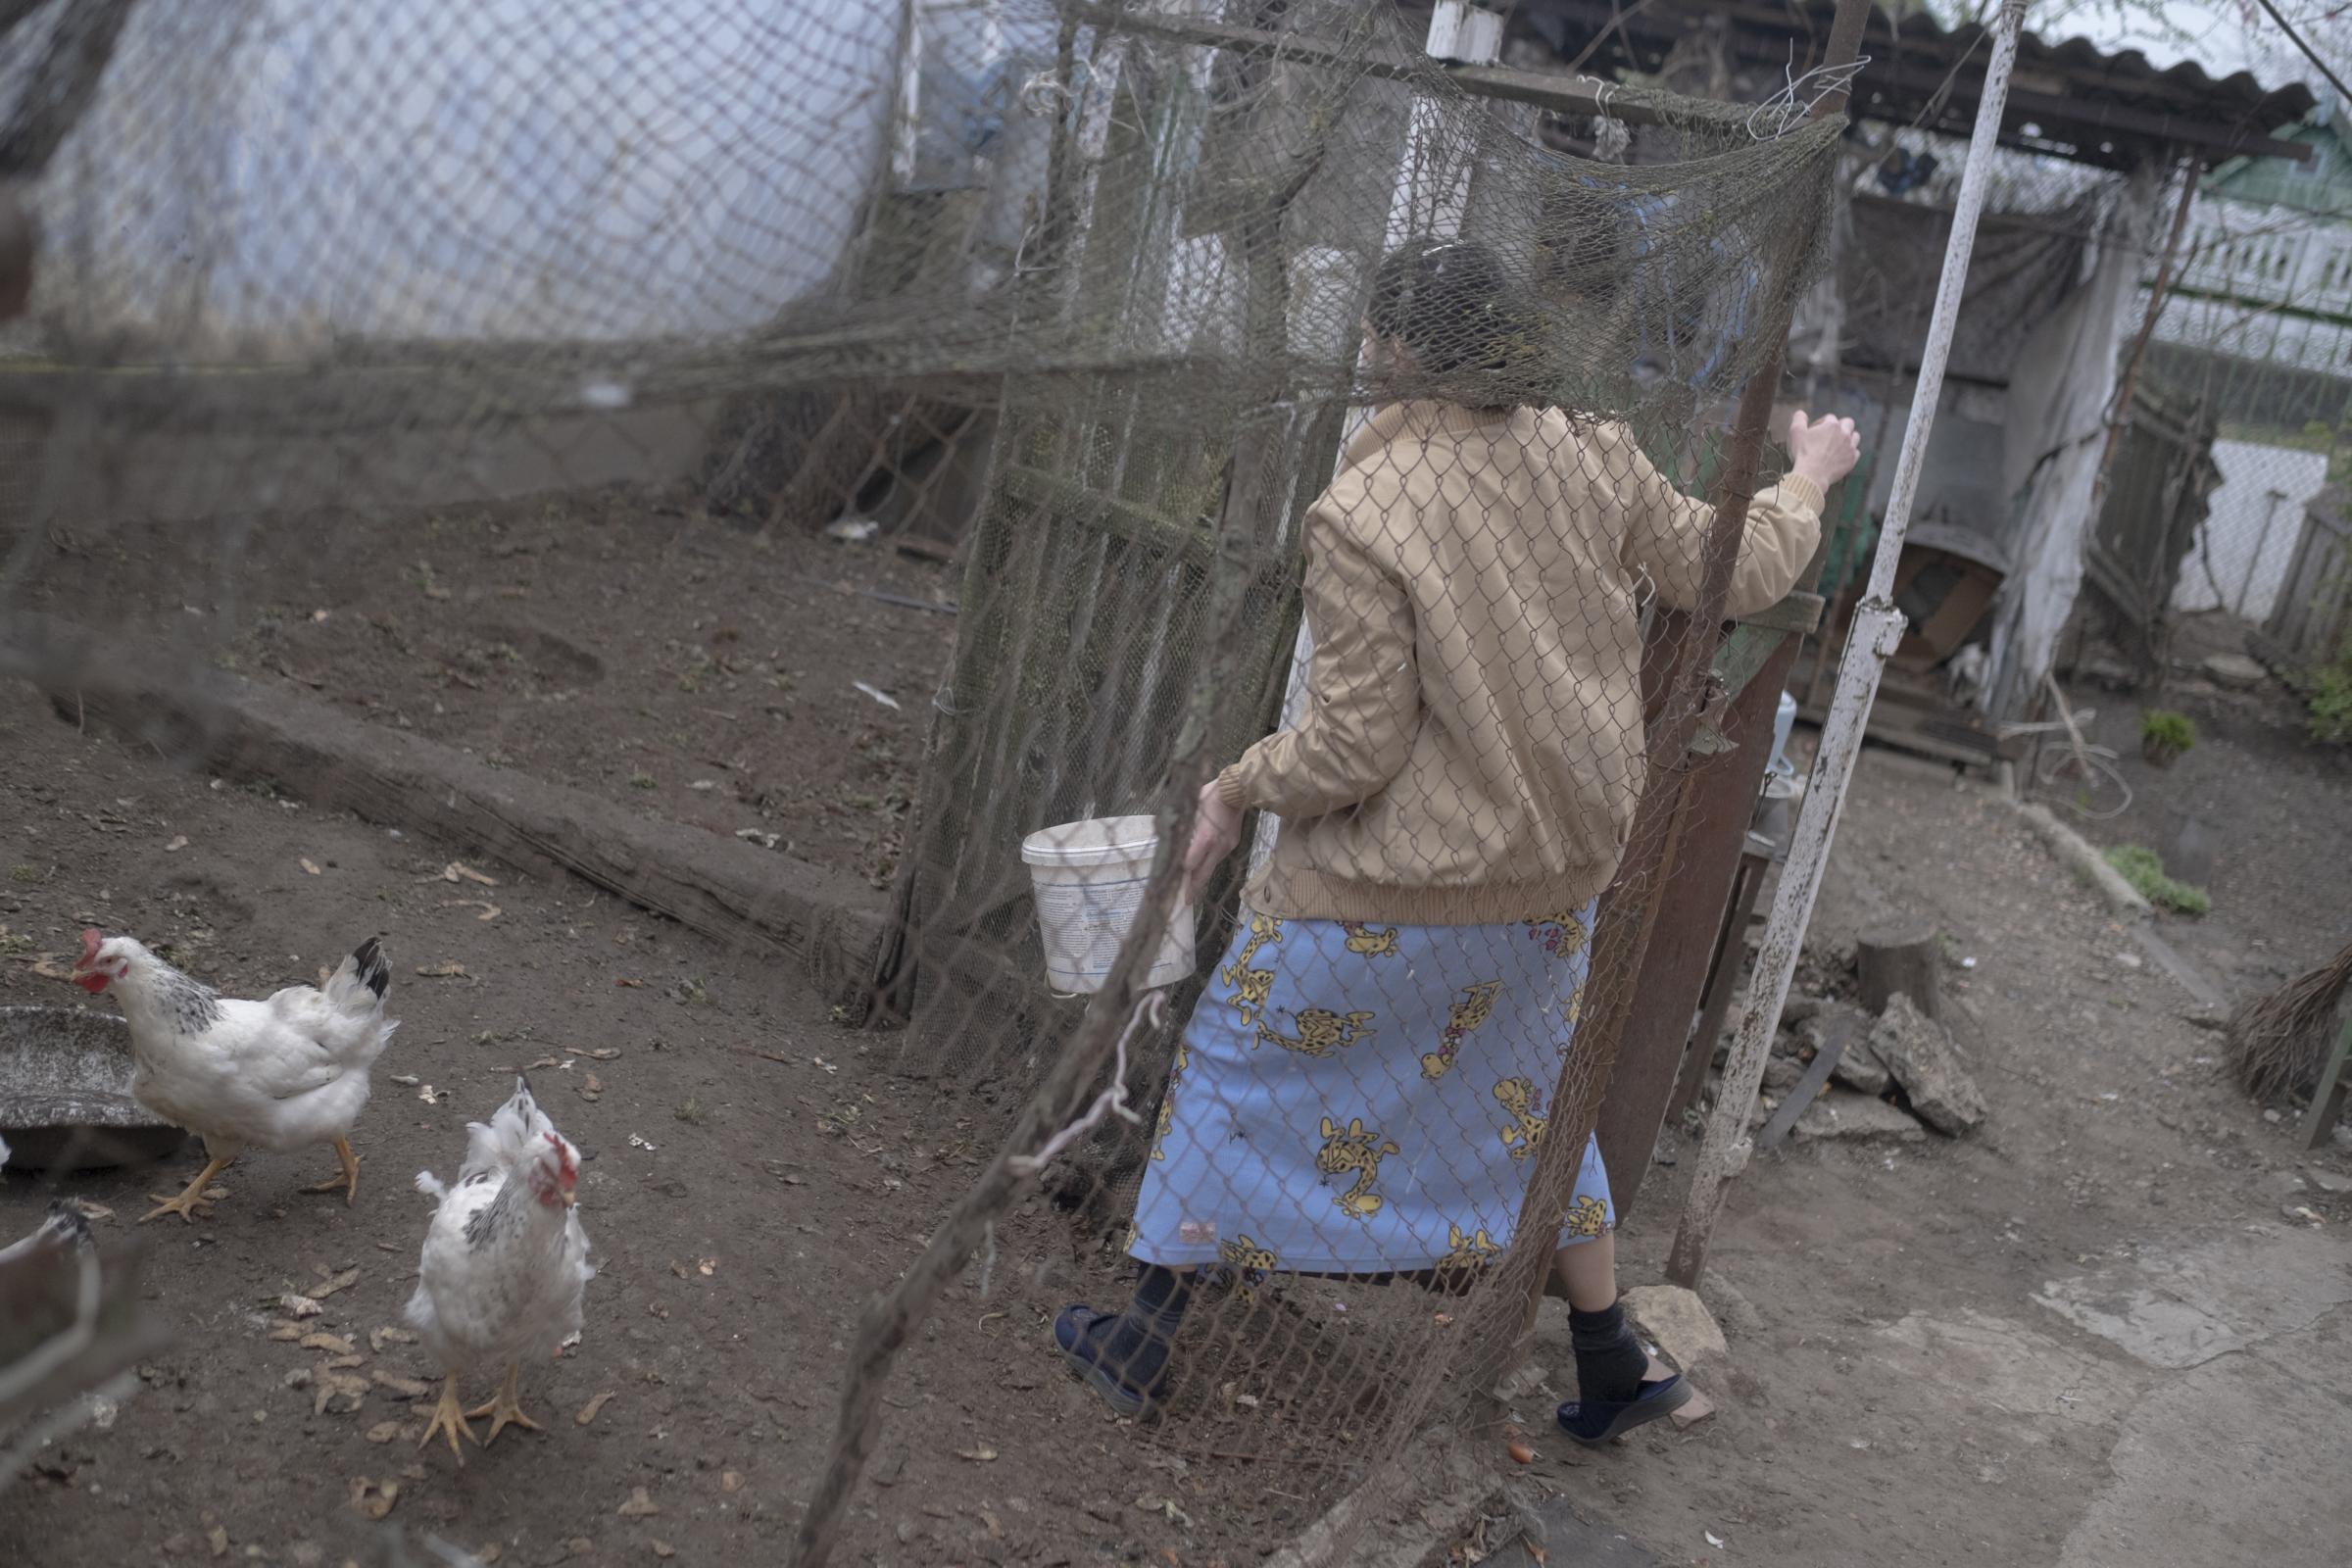 Moldovans who sheltered Ukrainian refugees at home - Lyuda is going to feed chicken.